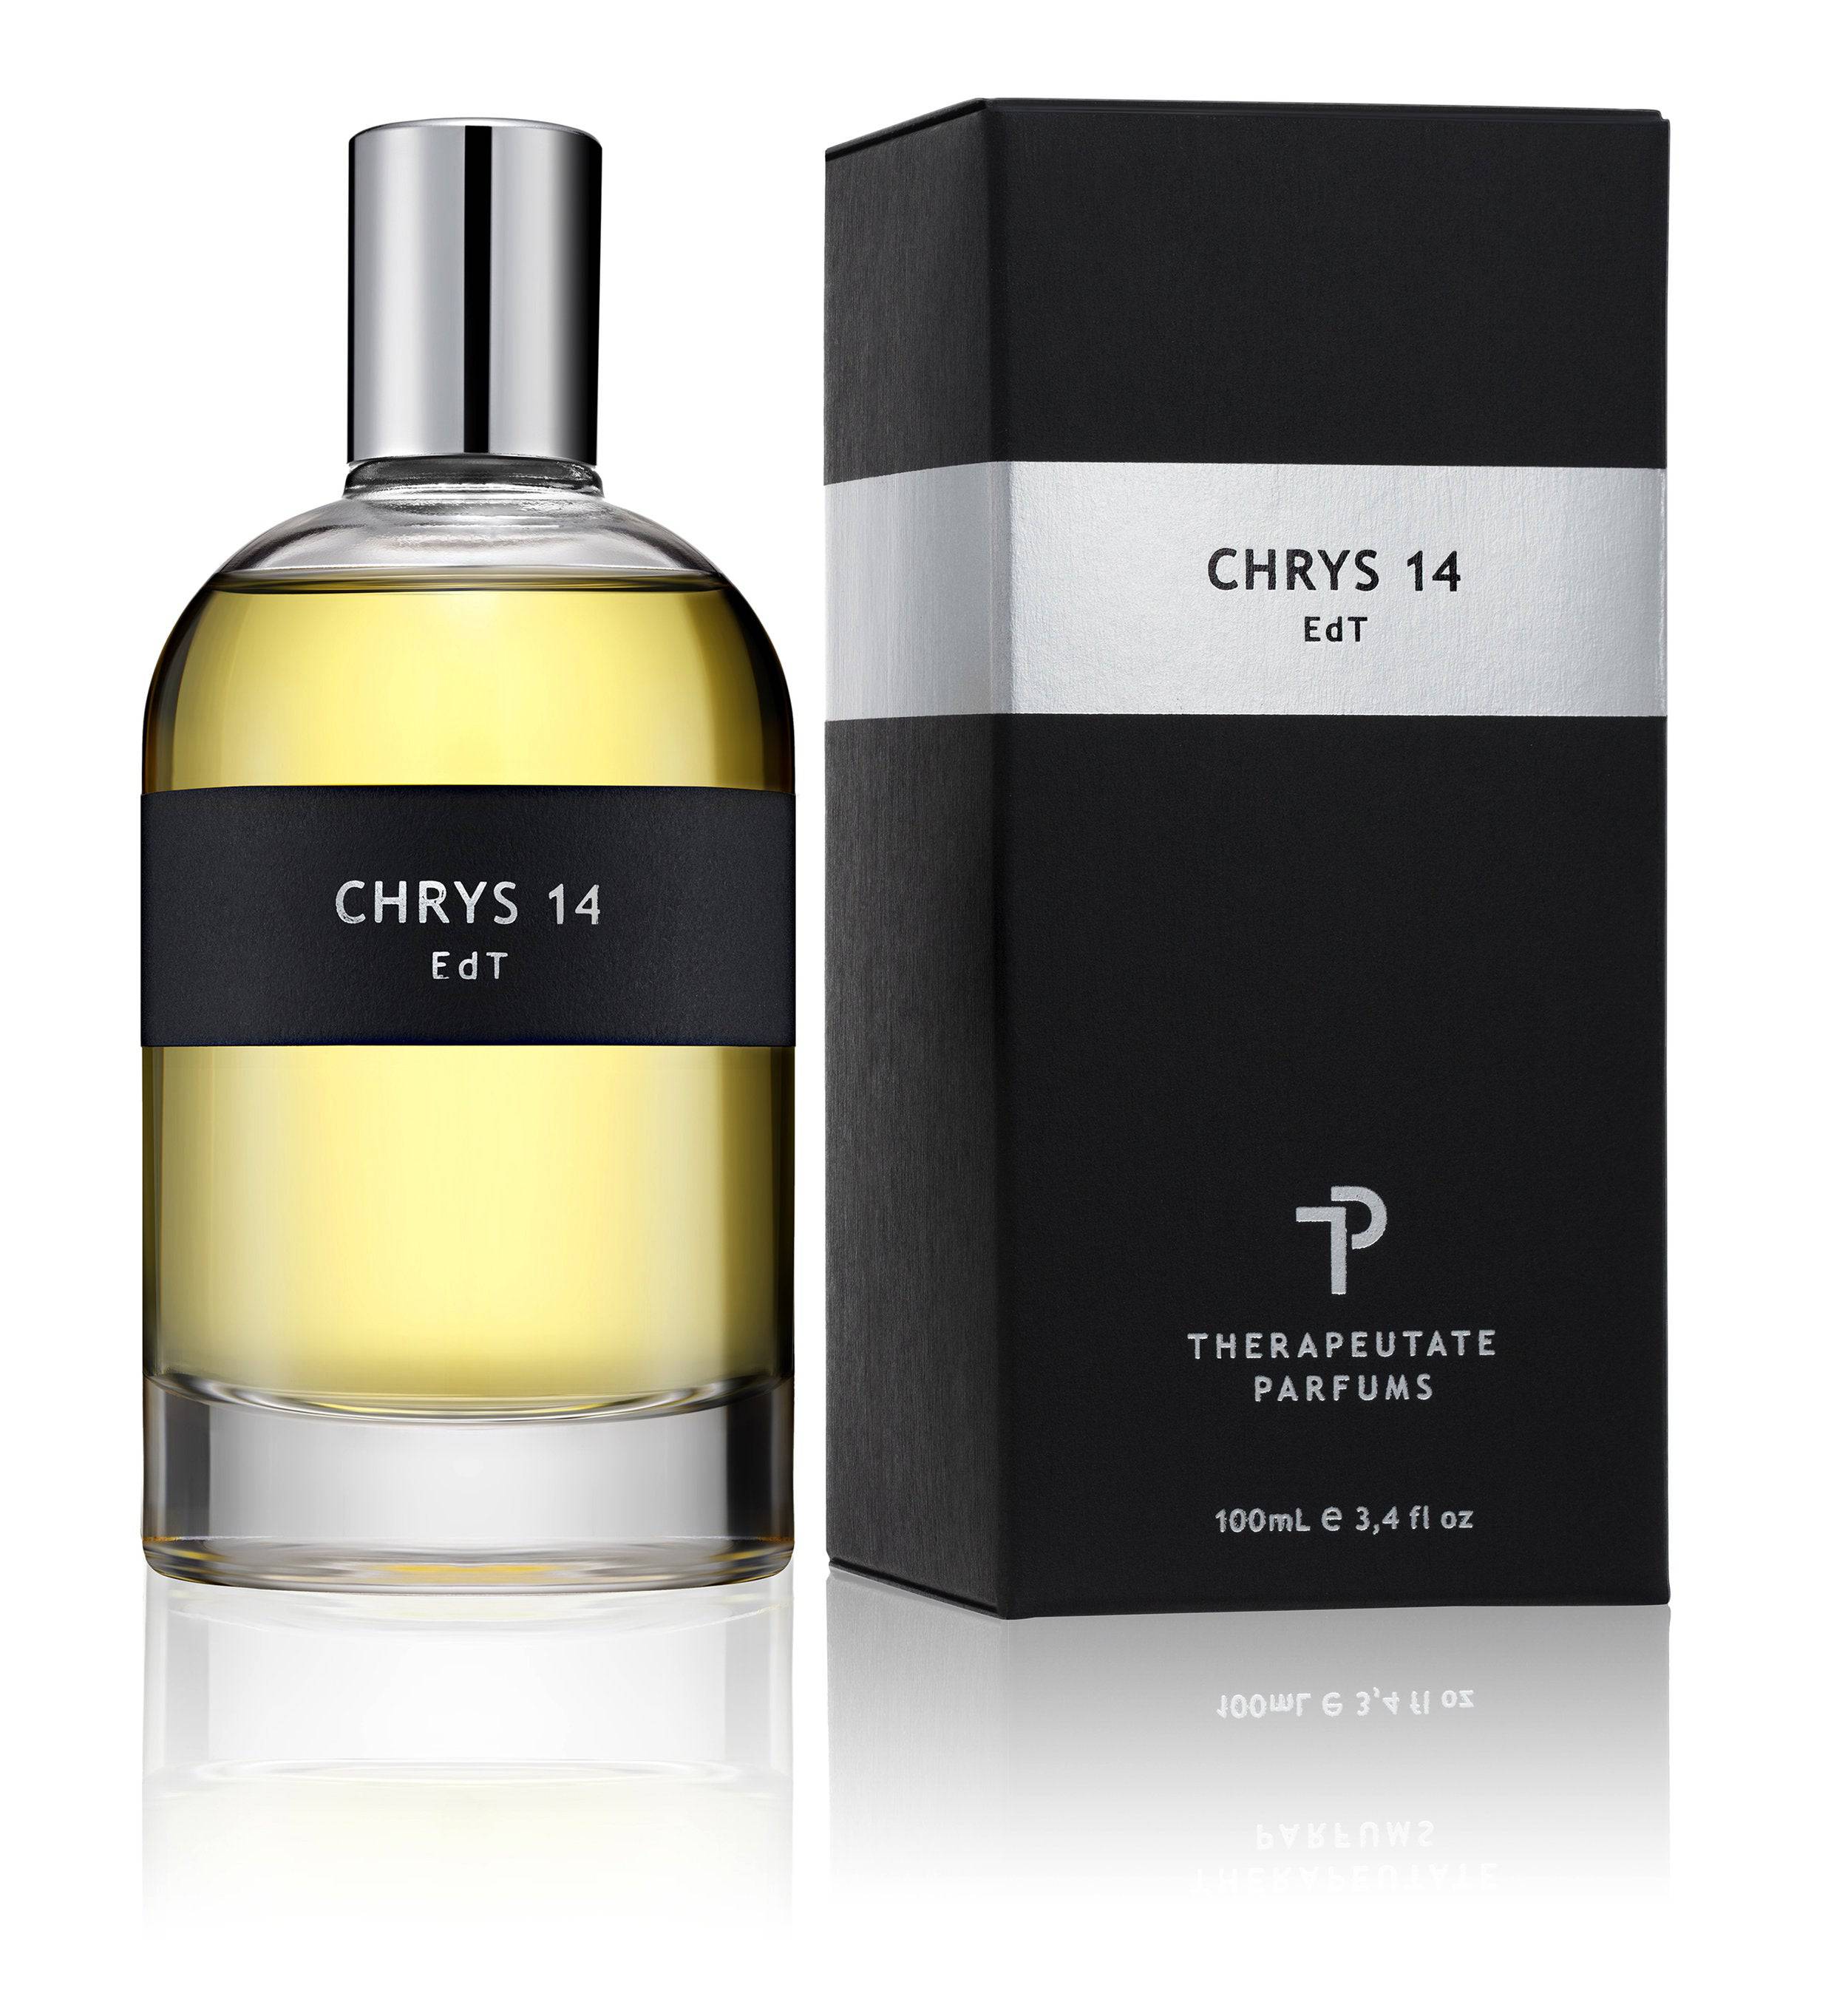  Chrys 14 Natural EDT Therapeutate Parfums Perfumarie